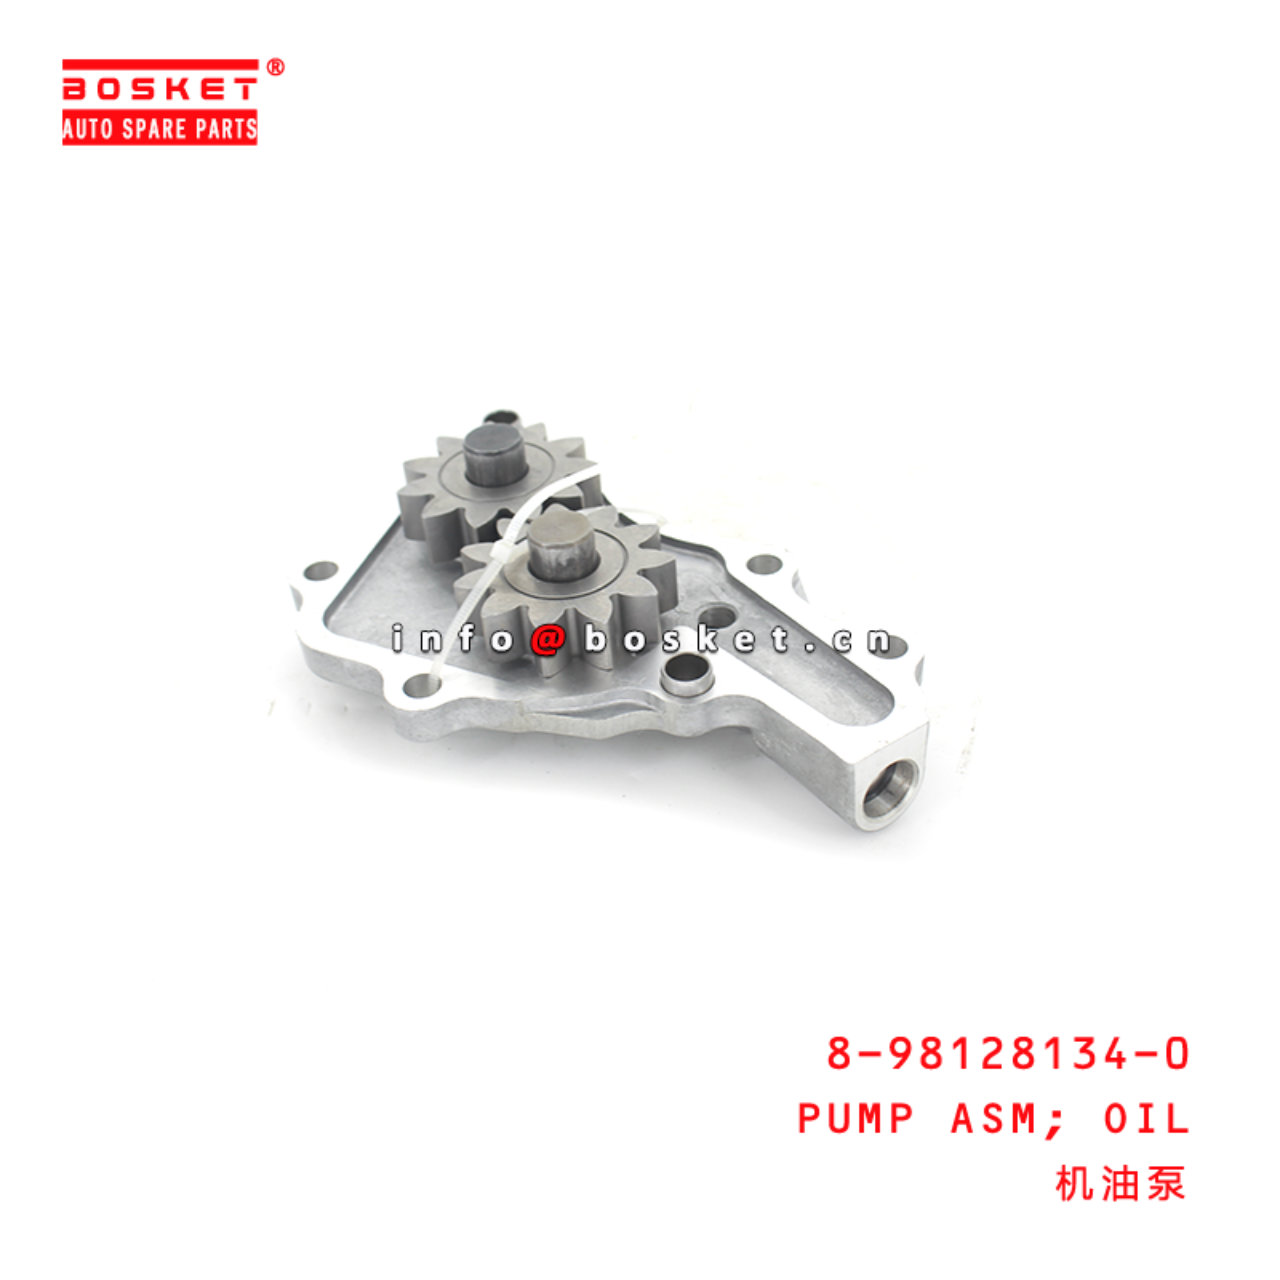 8-98128134-0 Oil Pump Assembly Suitable for ISUZU NLR85 8981281340